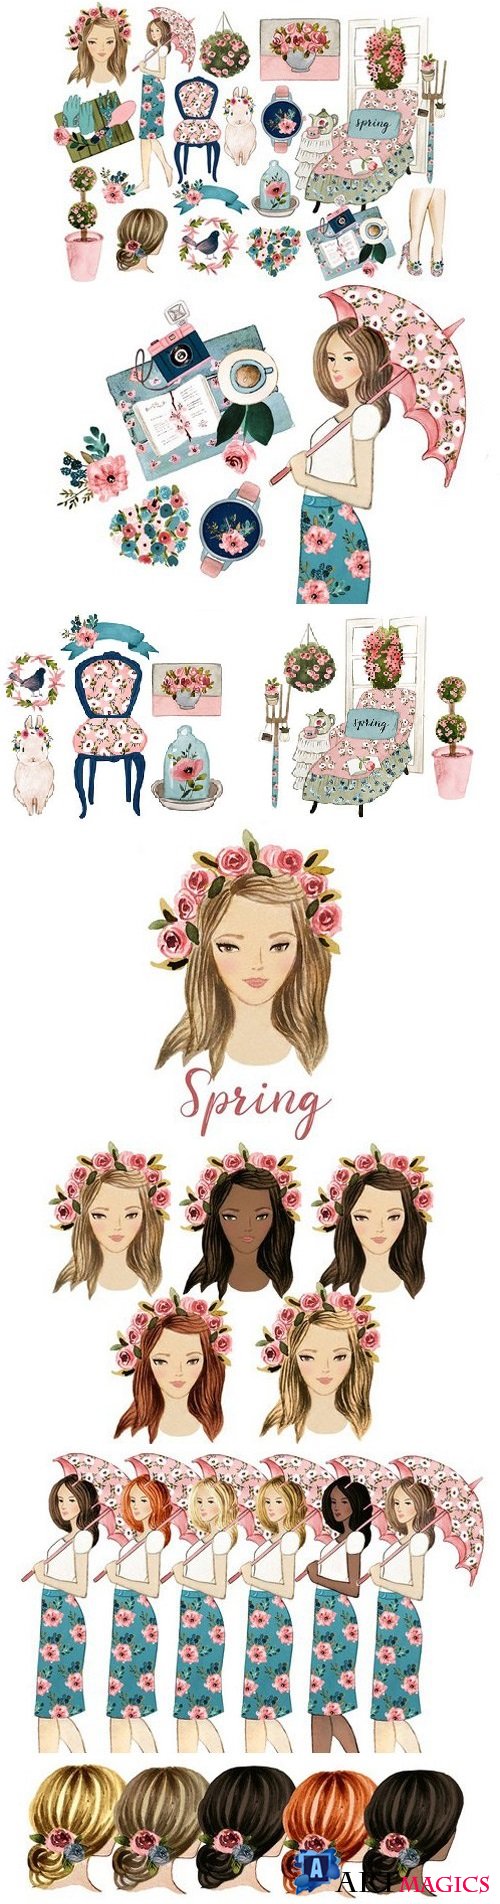 Spring clipart 2301216